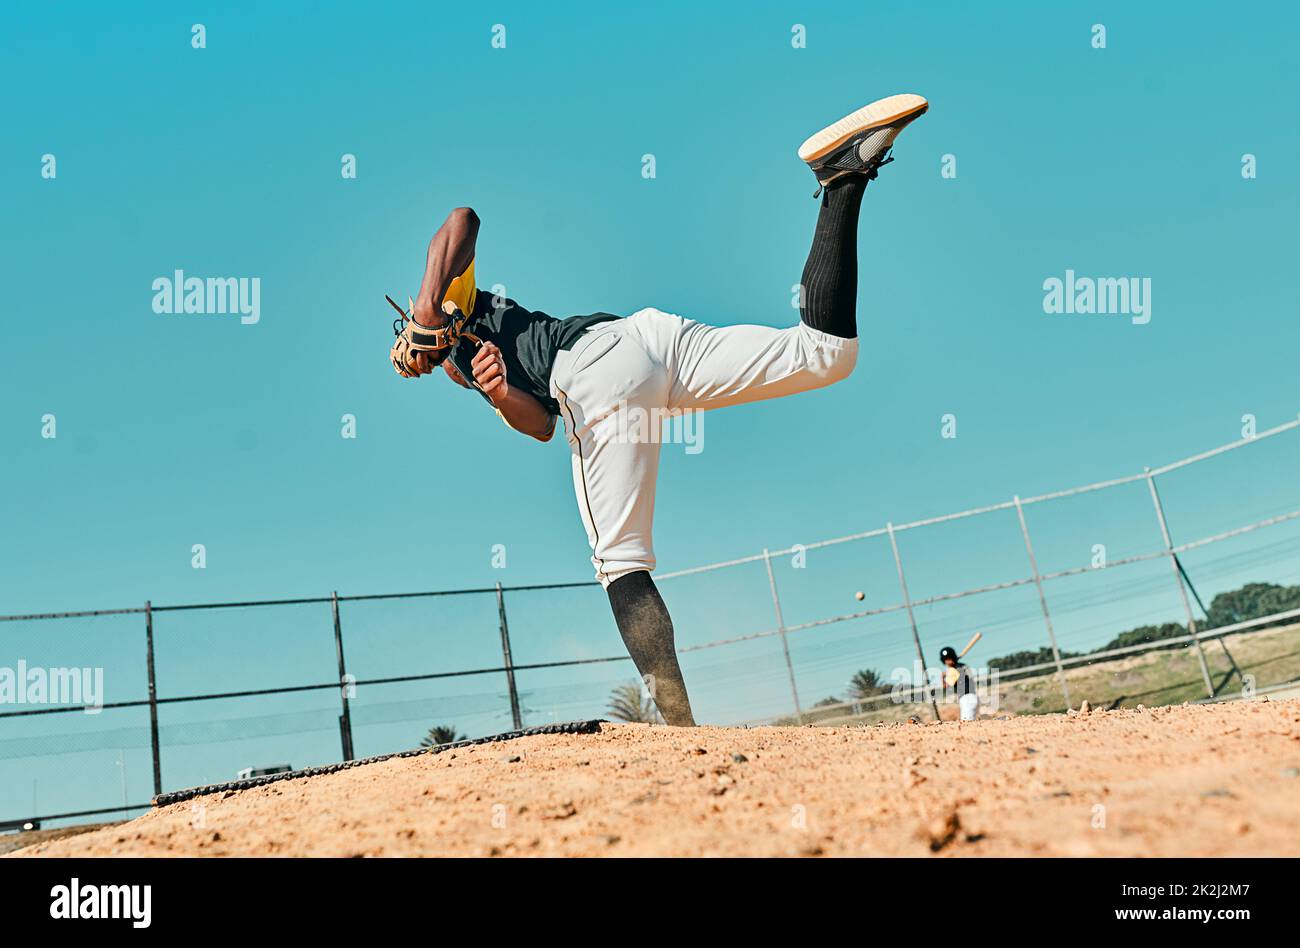 All it takes is all youve got. Shot of a young baseball player pitching the ball during a game outdoors. Stock Photo